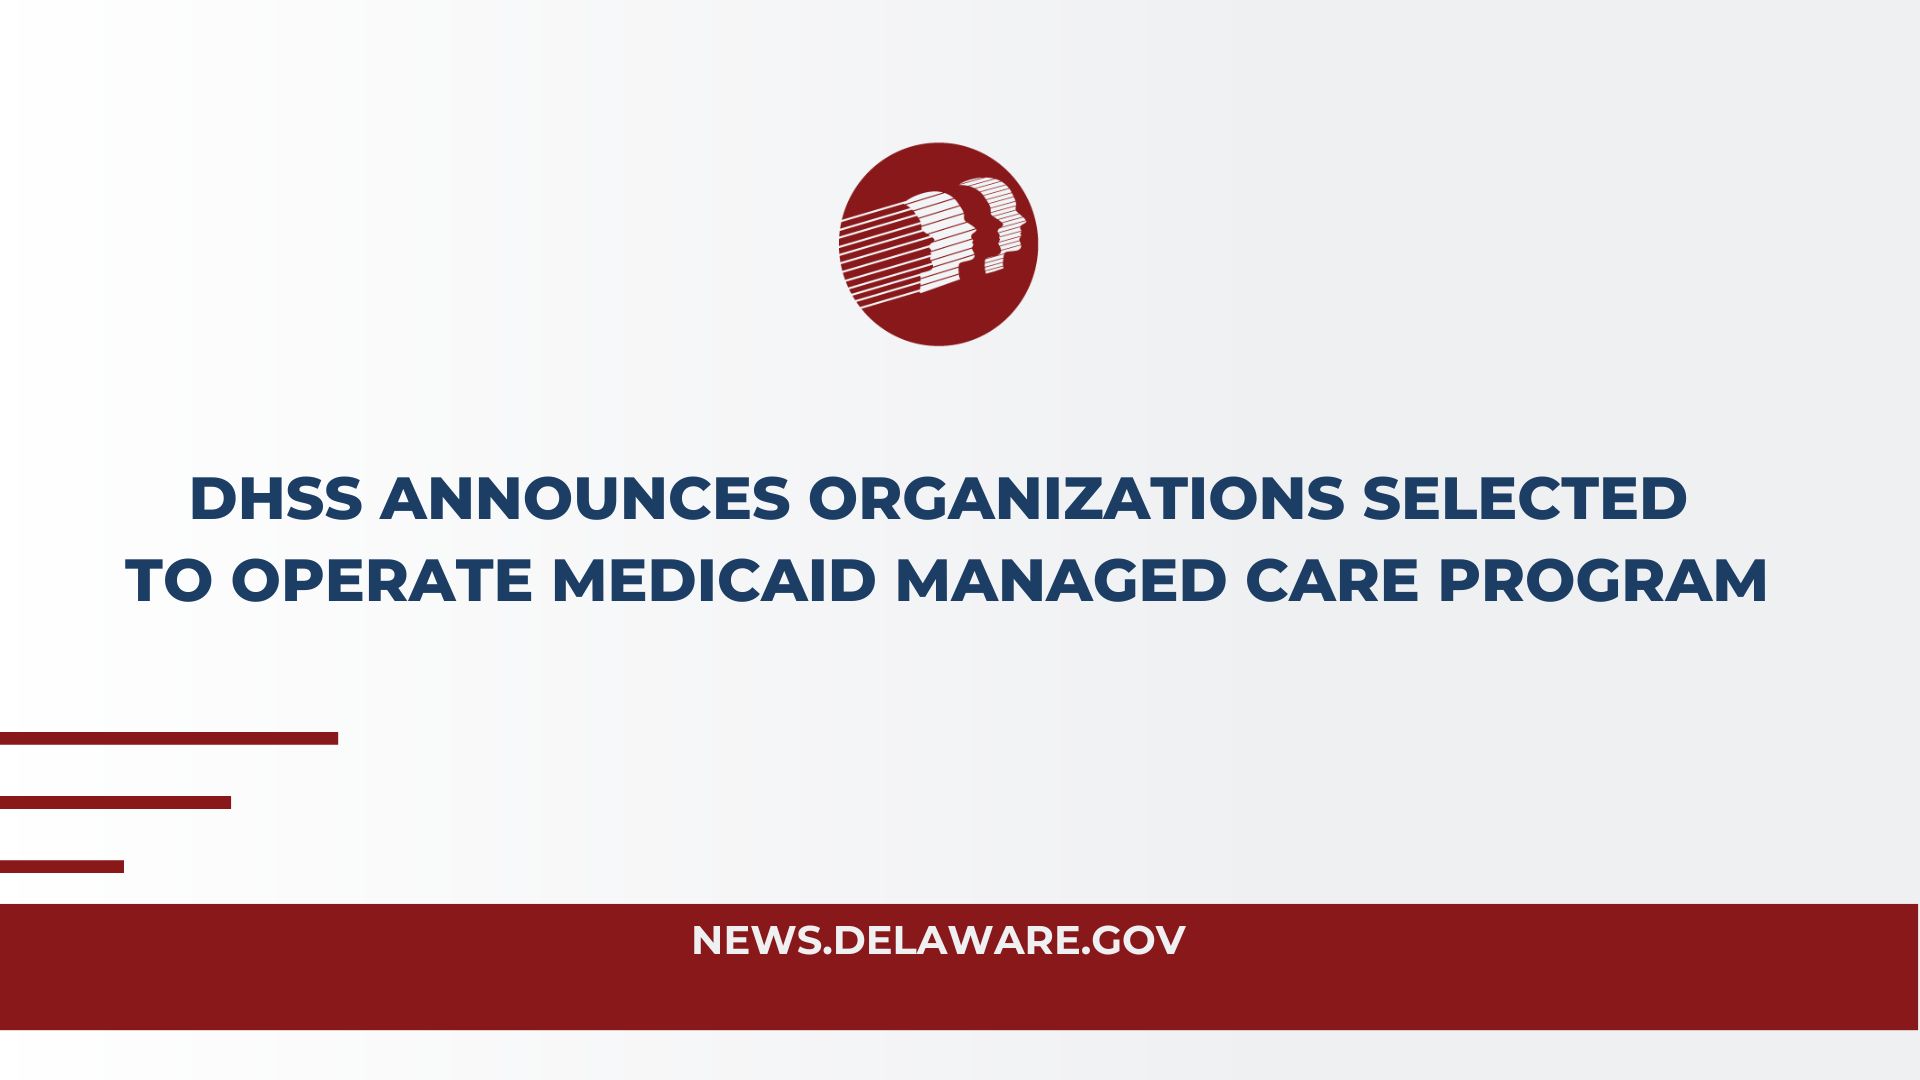 DHSS Announces Organizations Selected to Operate Medicaid Managed Care Program